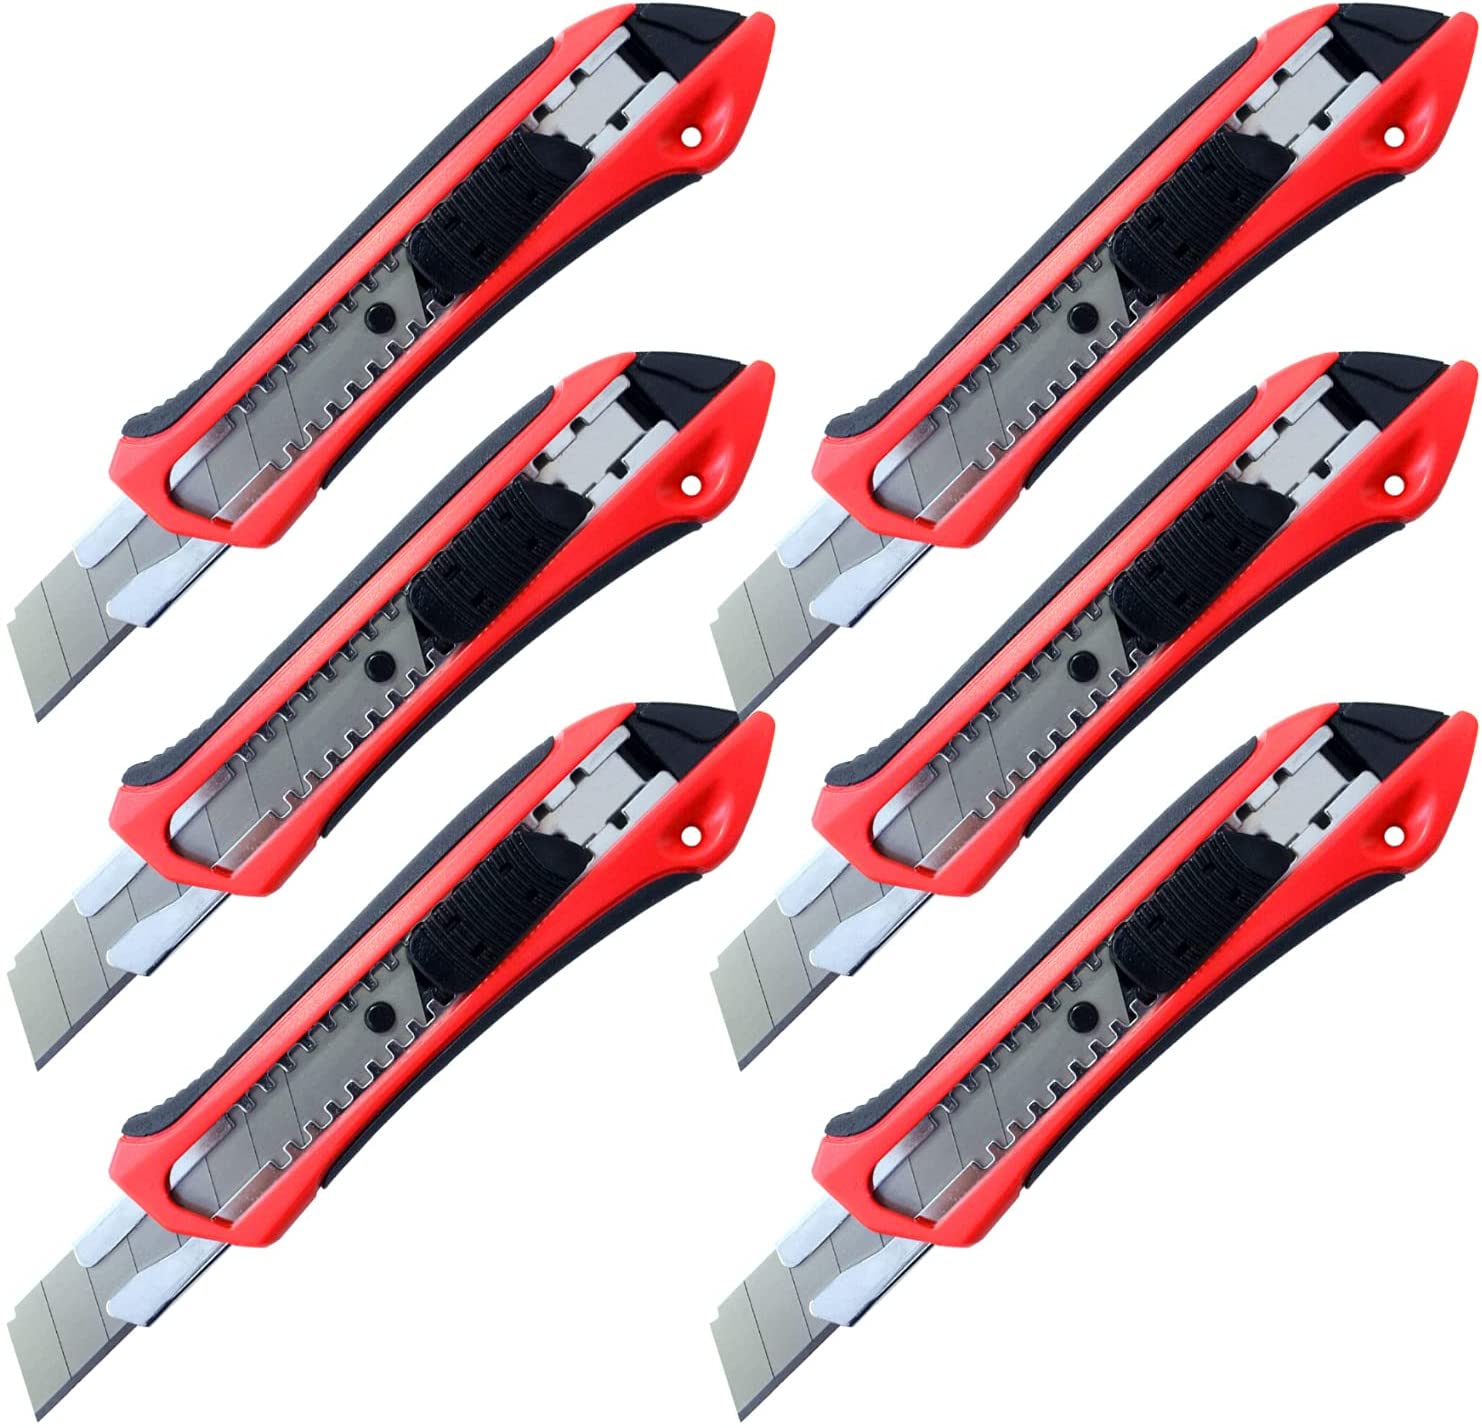 Cutter knife, 18 mm, carpet knife, 6 pieces, rubberised handle, snap off blades, professional cutter, 18 mm